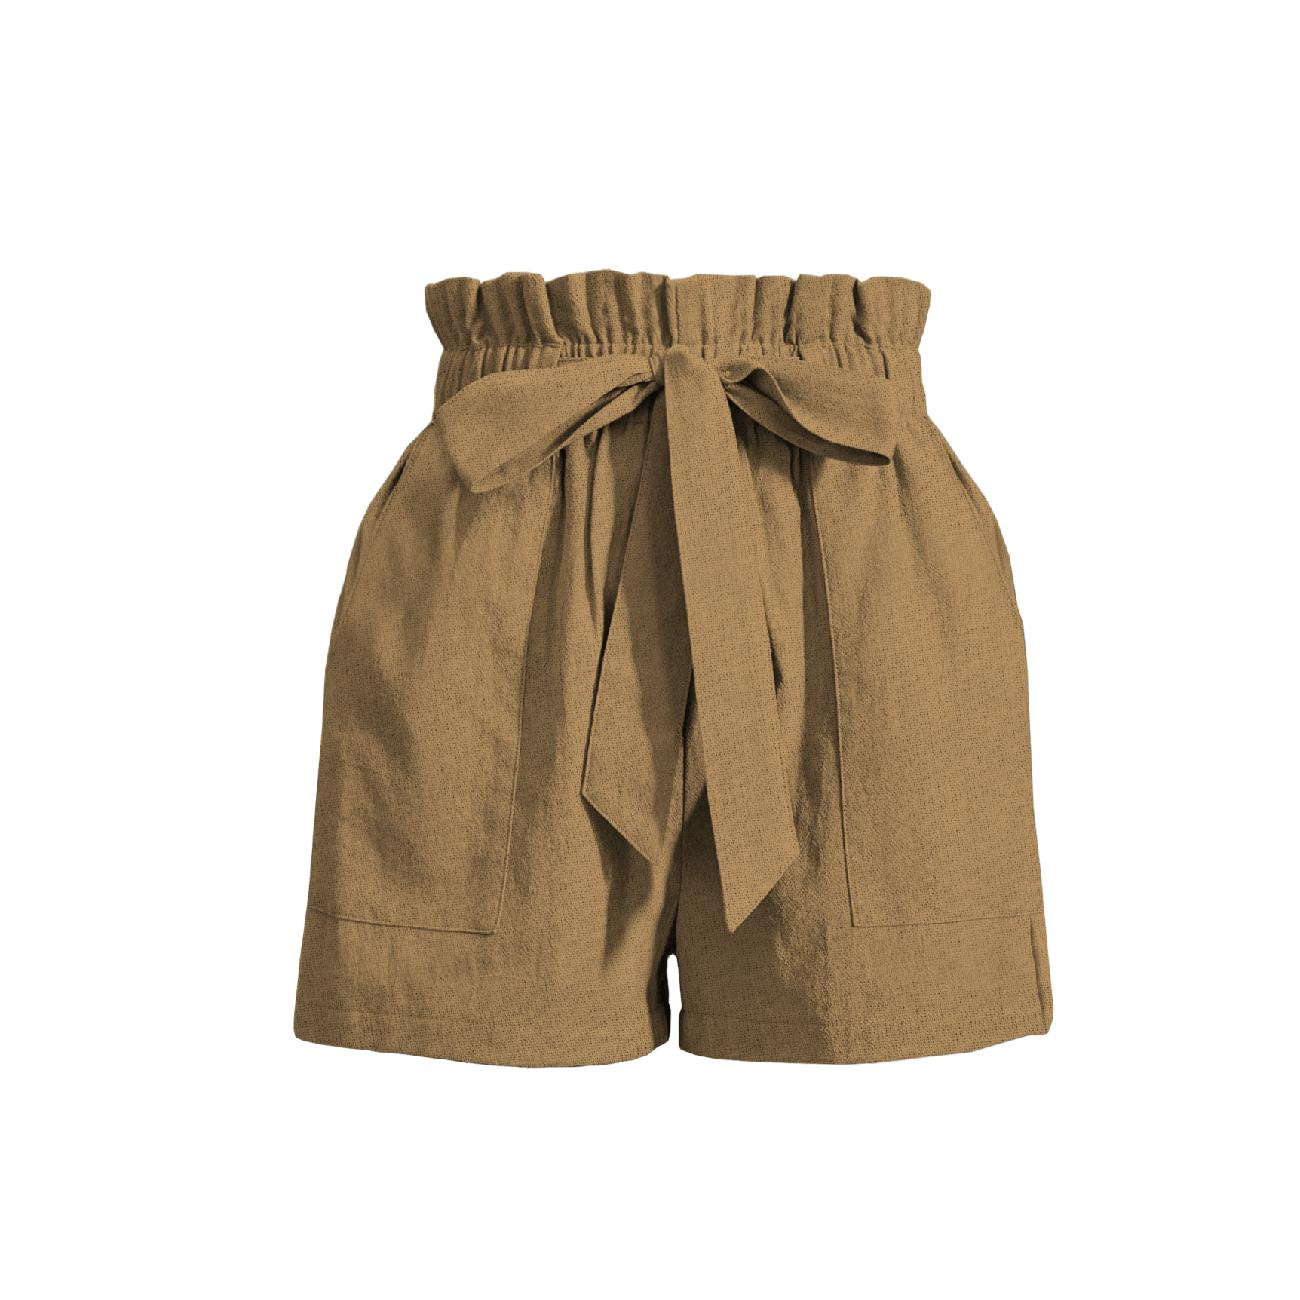 PAPERBAG SHORTS - CAPPUCCINO - Nähset